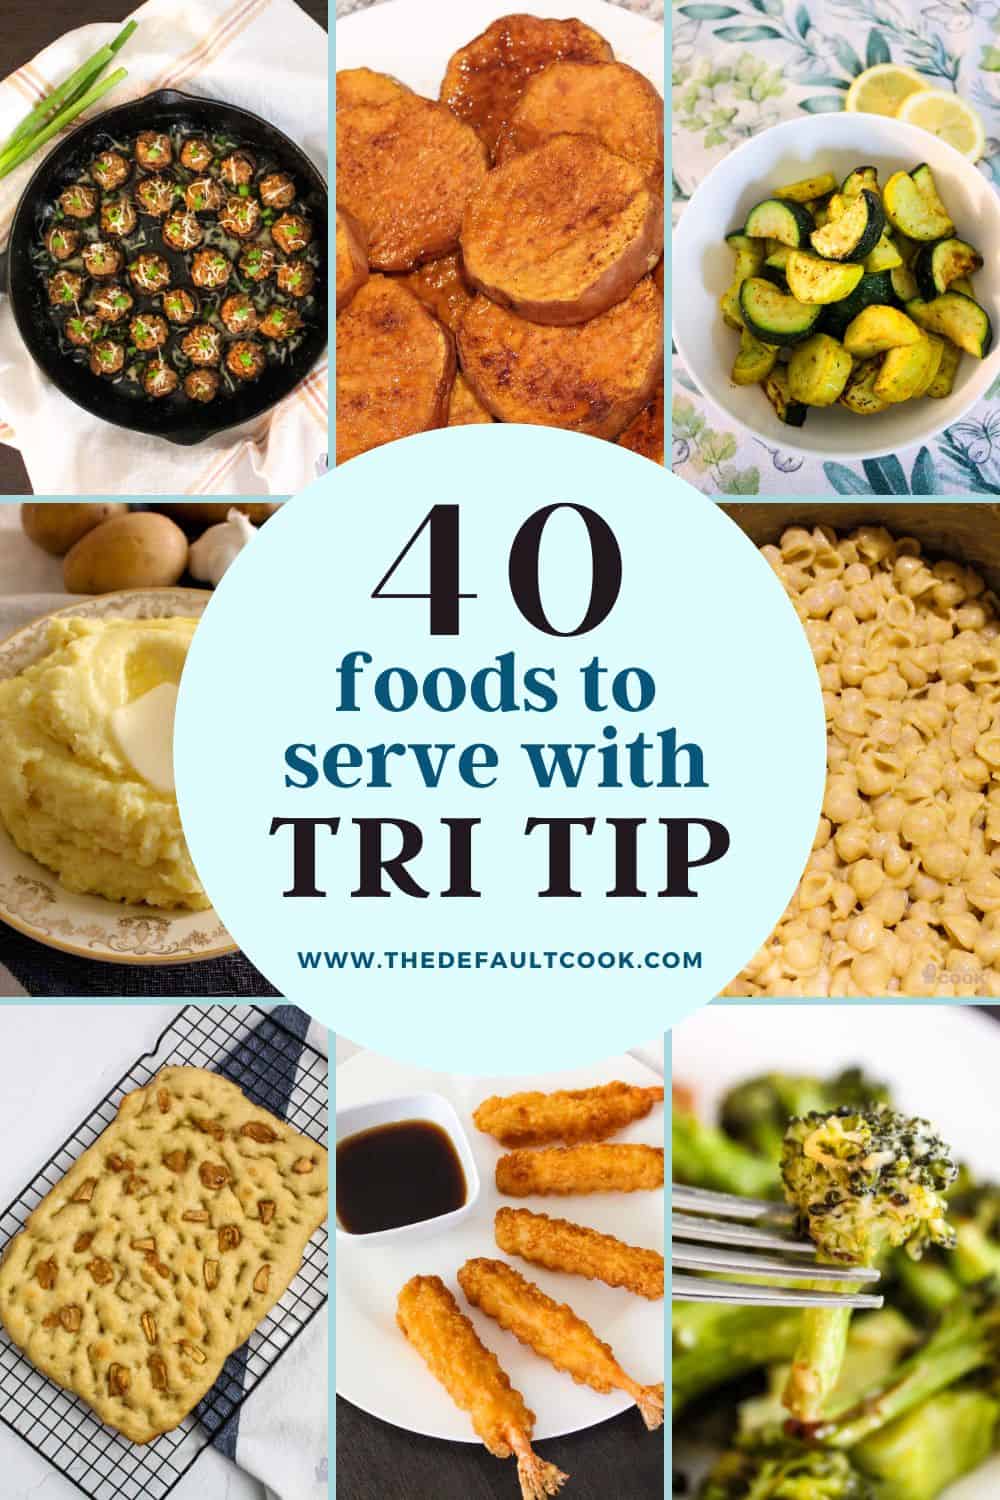 Grid of 8 images with center spot reading "40 foods to serve with Tri Tip" and 8 photos of mushrooms, sweet potatoes, zucchini, mashed potatoes, mac and cheese, bread, shrimp, and broccoli.